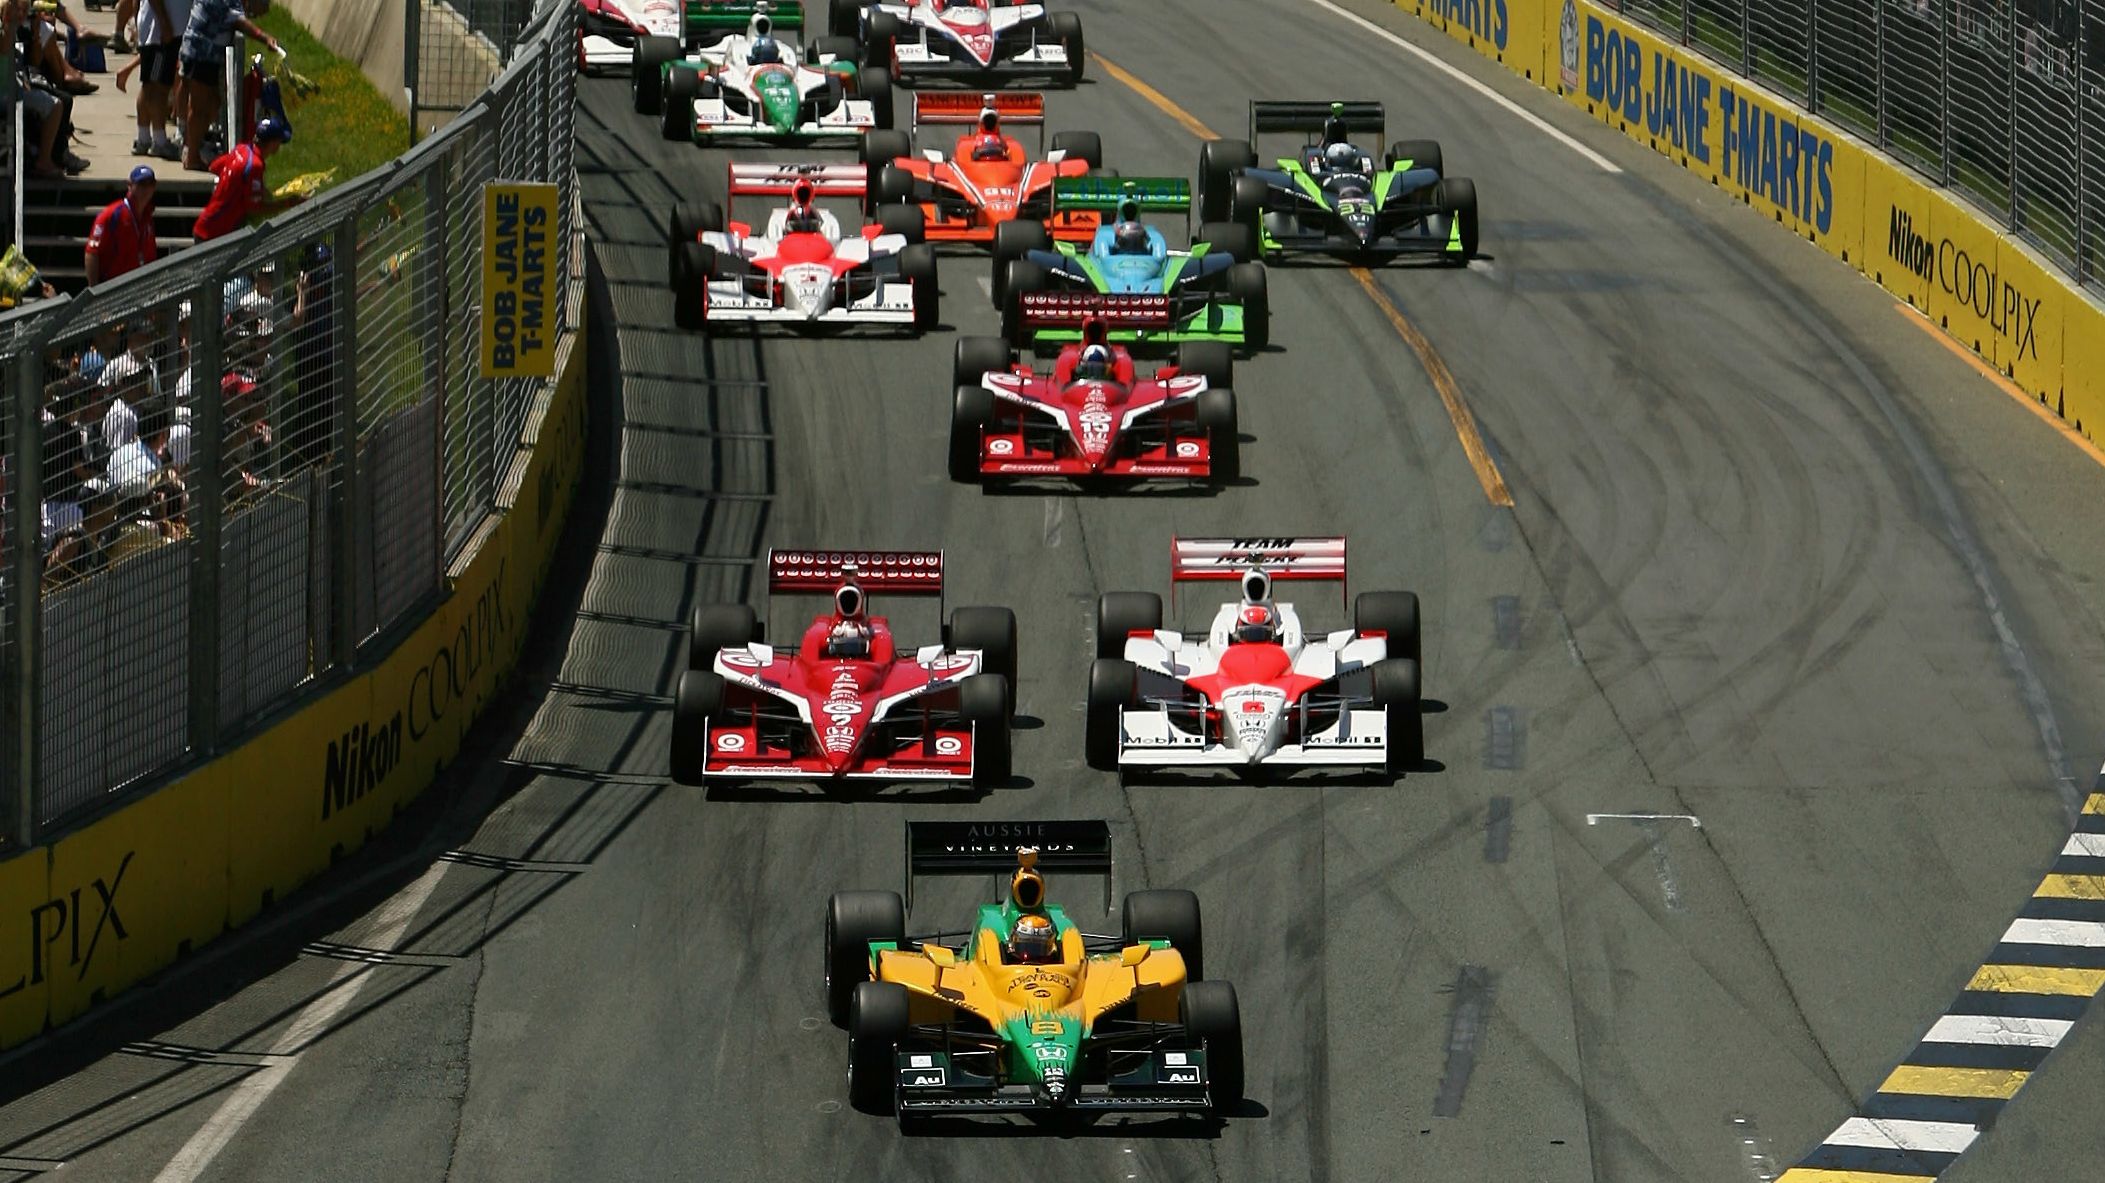 Will Power of the Team Australia leads into turn one during the IndyCar Series Indy 300 on the Gold Coast in 2008.